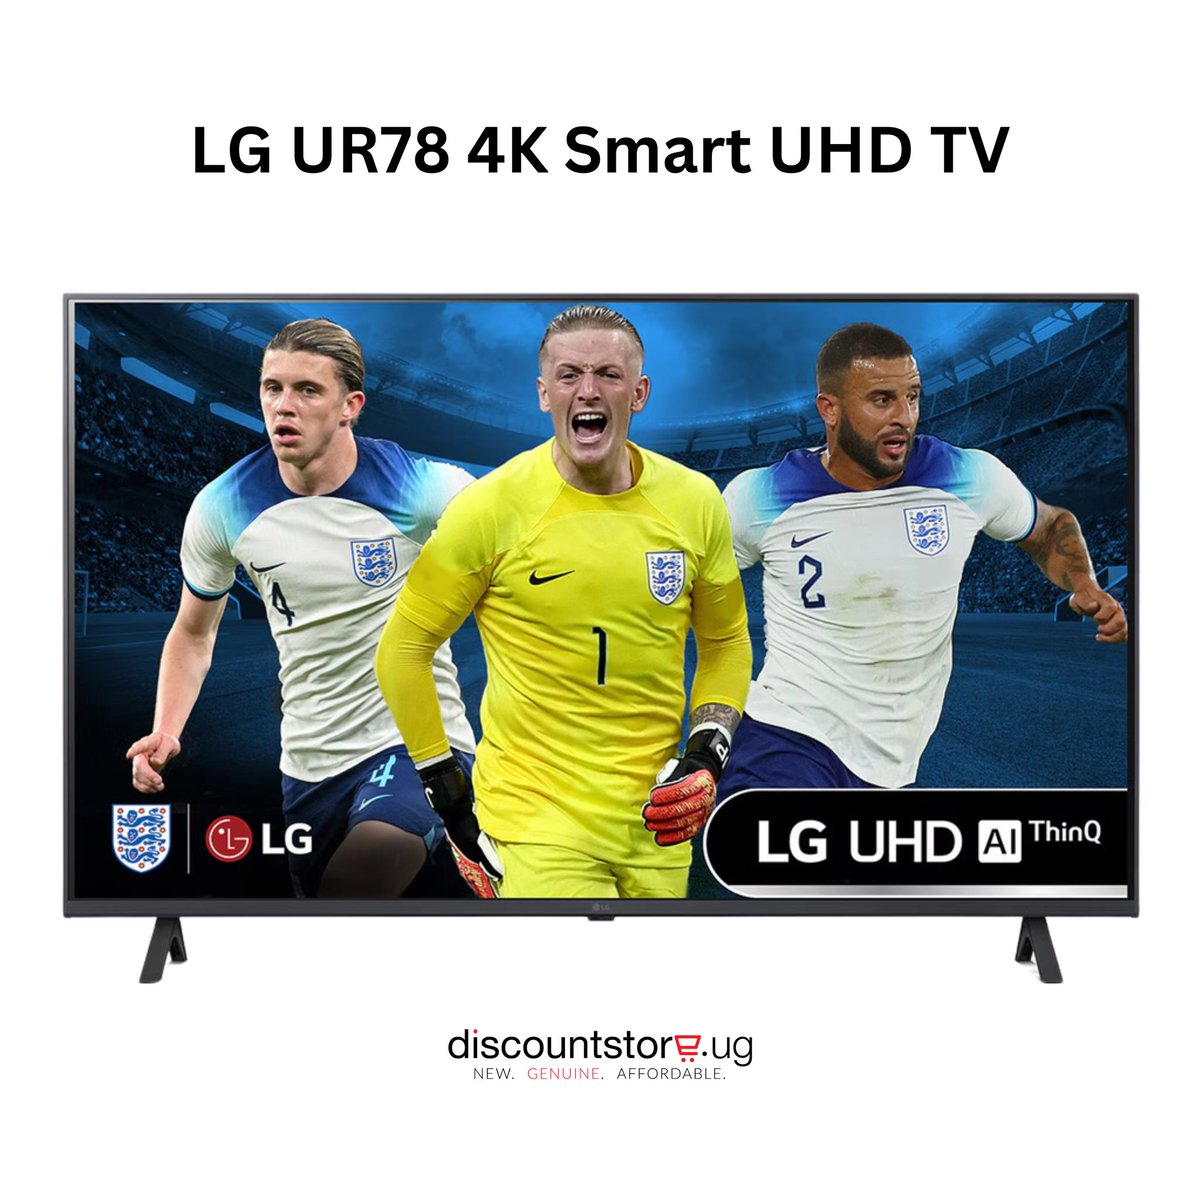 Redefine Scale of 4K
Watch non-4K content in 4K on big UHD screens to enjoy clarity & precision in every moment.
55 LG UR78 UHD 4K Smart TV available at 2.65mugx
We deliver countrywide. Call/WhatsApp 0704 196 951
#discountstoreug #tv #kampala #gaming #lg #smarthome #entertainment